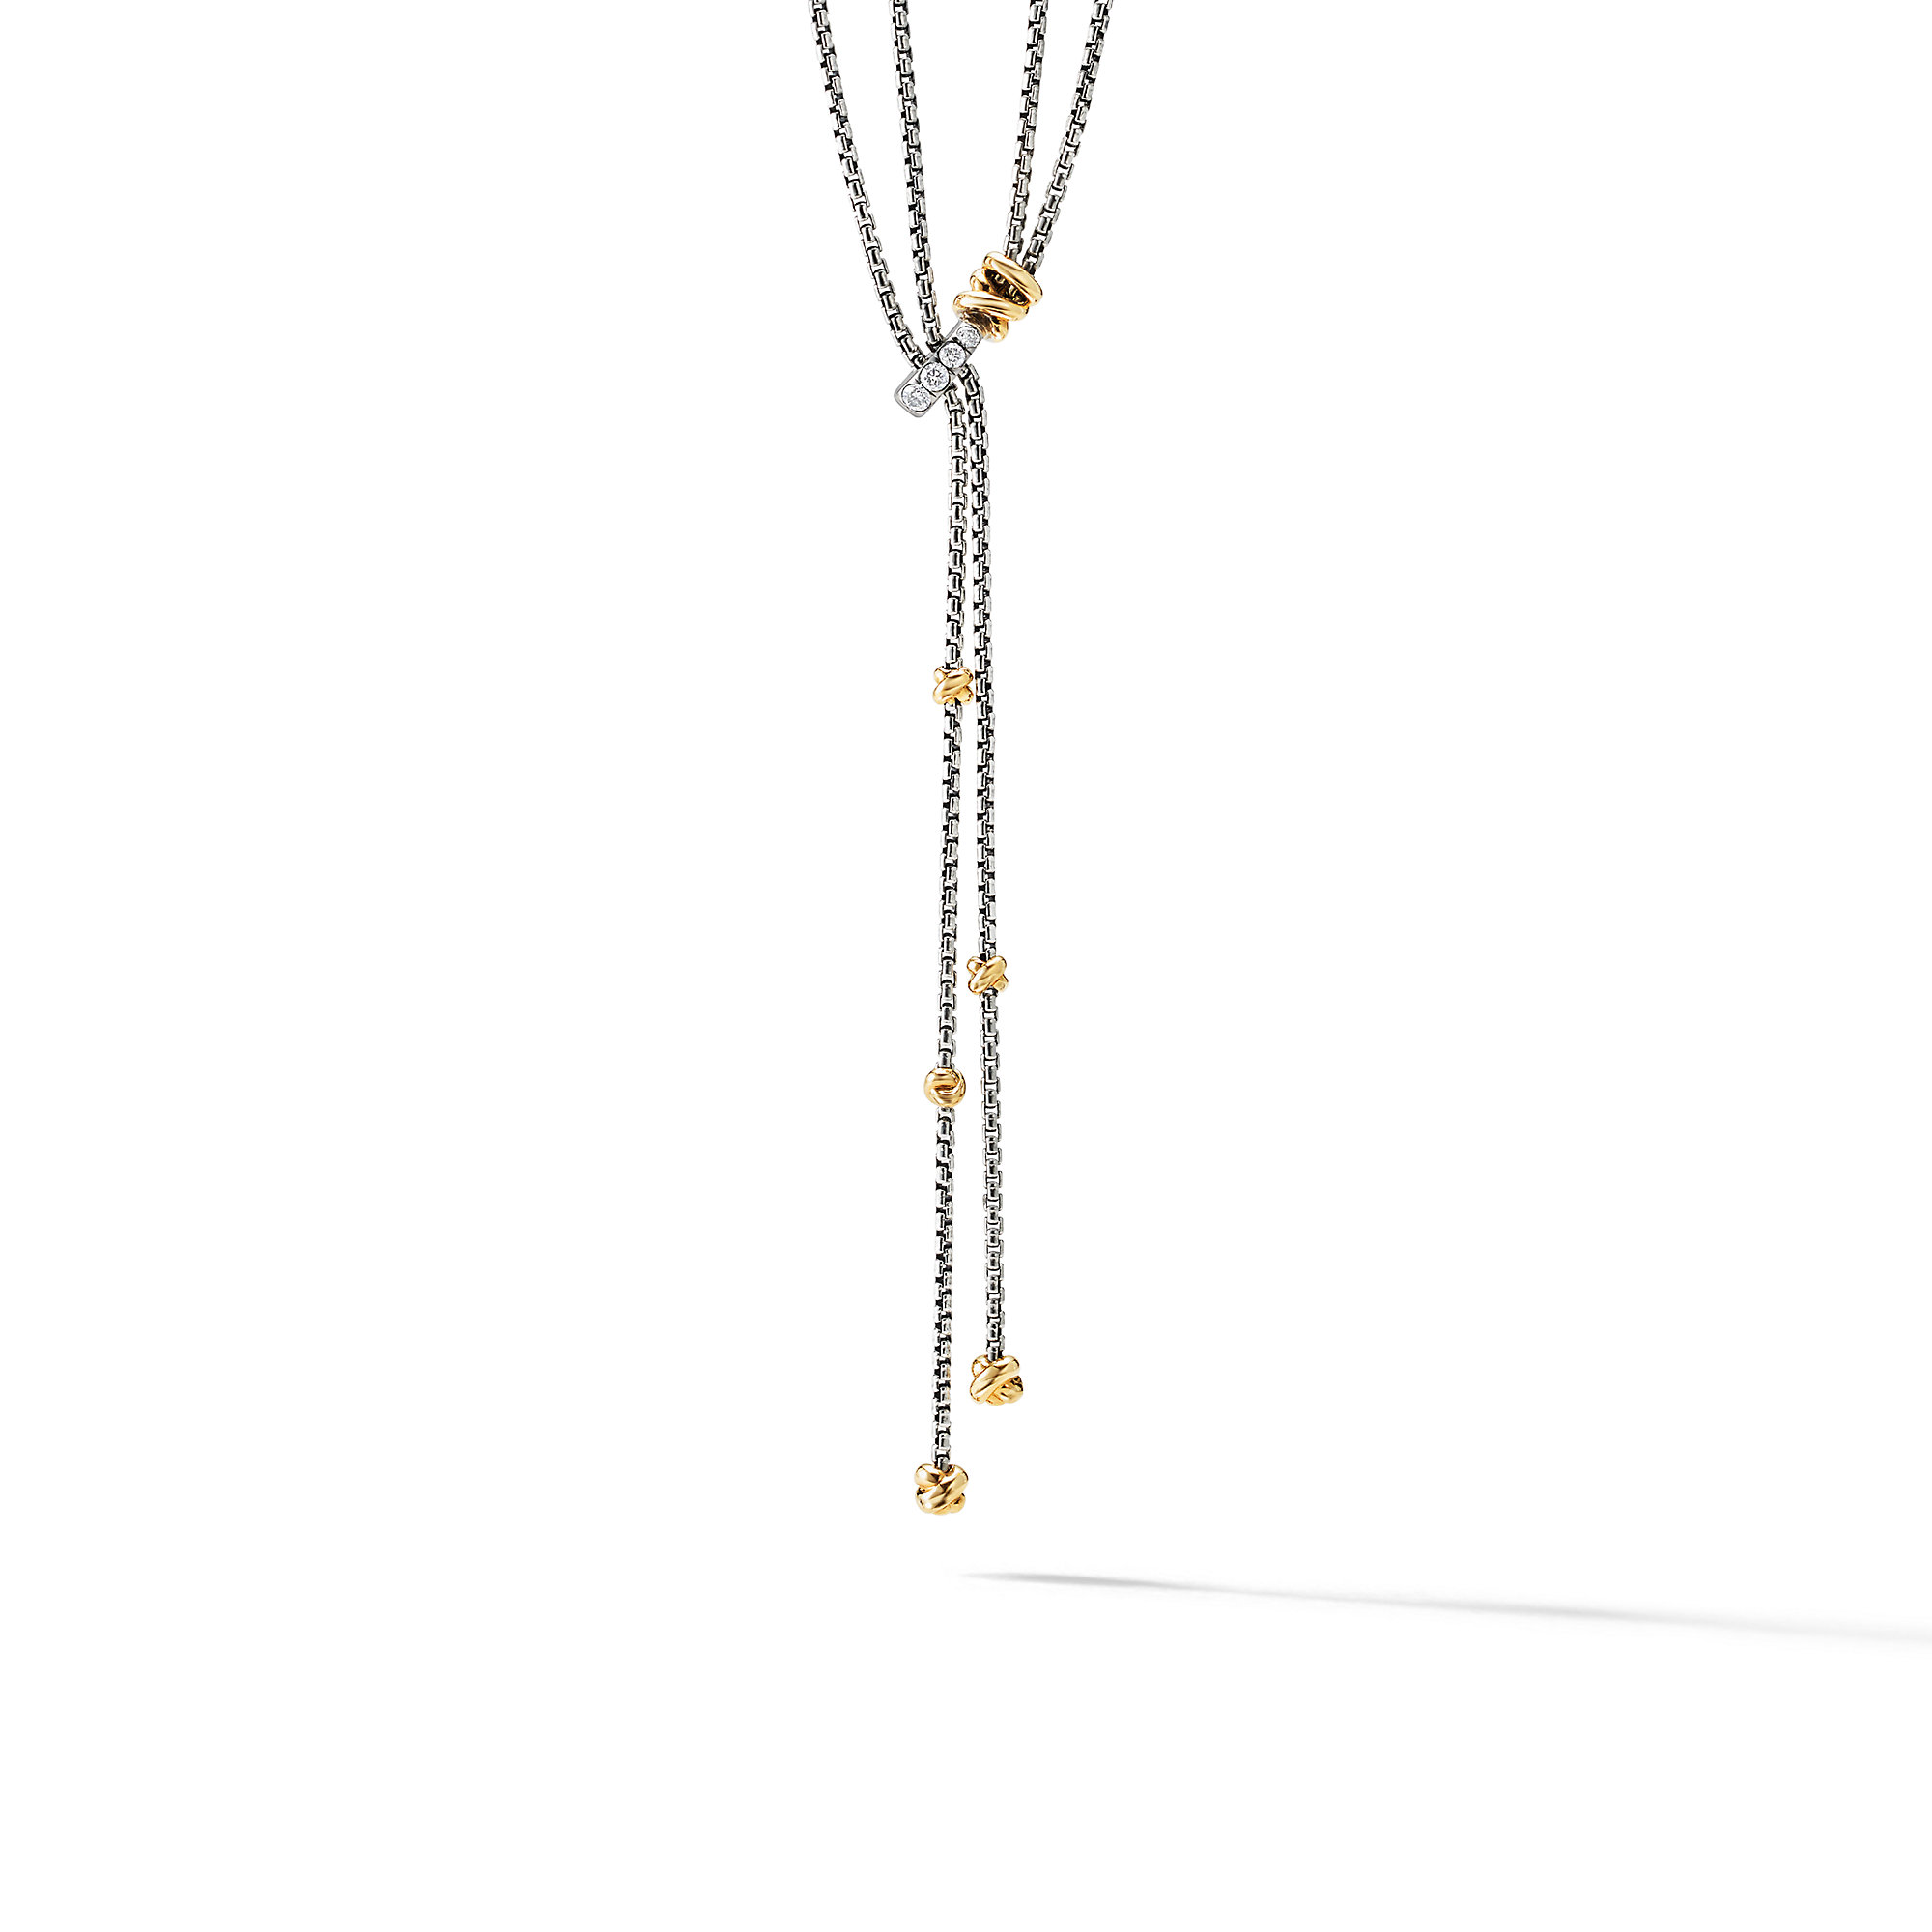 Petite Helena Y Necklace in Sterling Silver with 18K Yellow Gold and Pave Diamonds